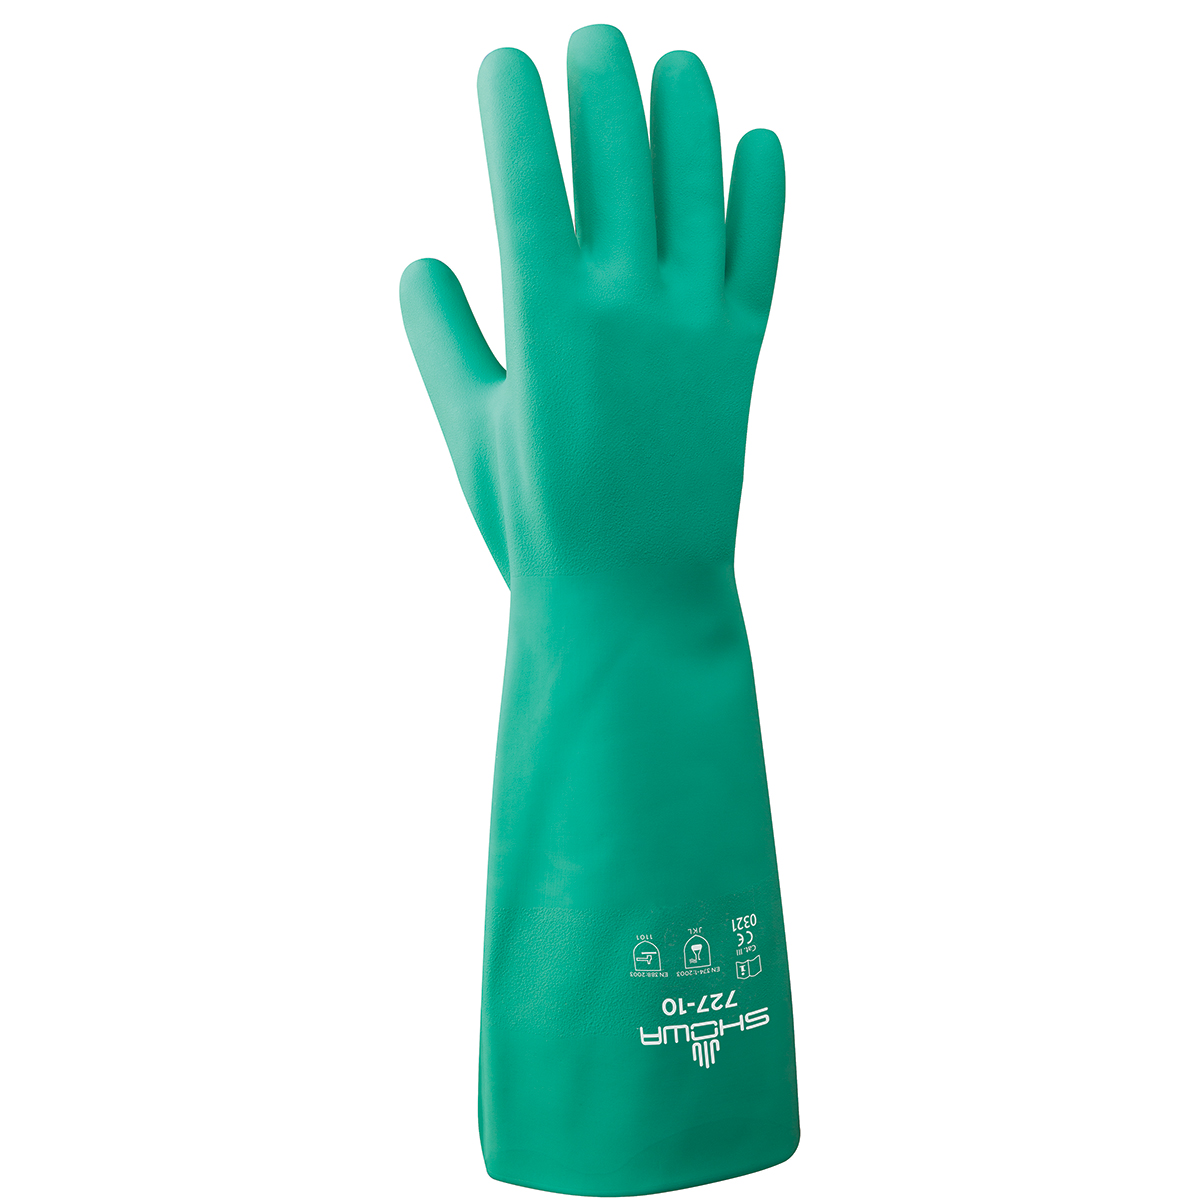 Chemical resistant unsupported nitrile, 13", 15-mil, light green, bisque finish, unlined, small